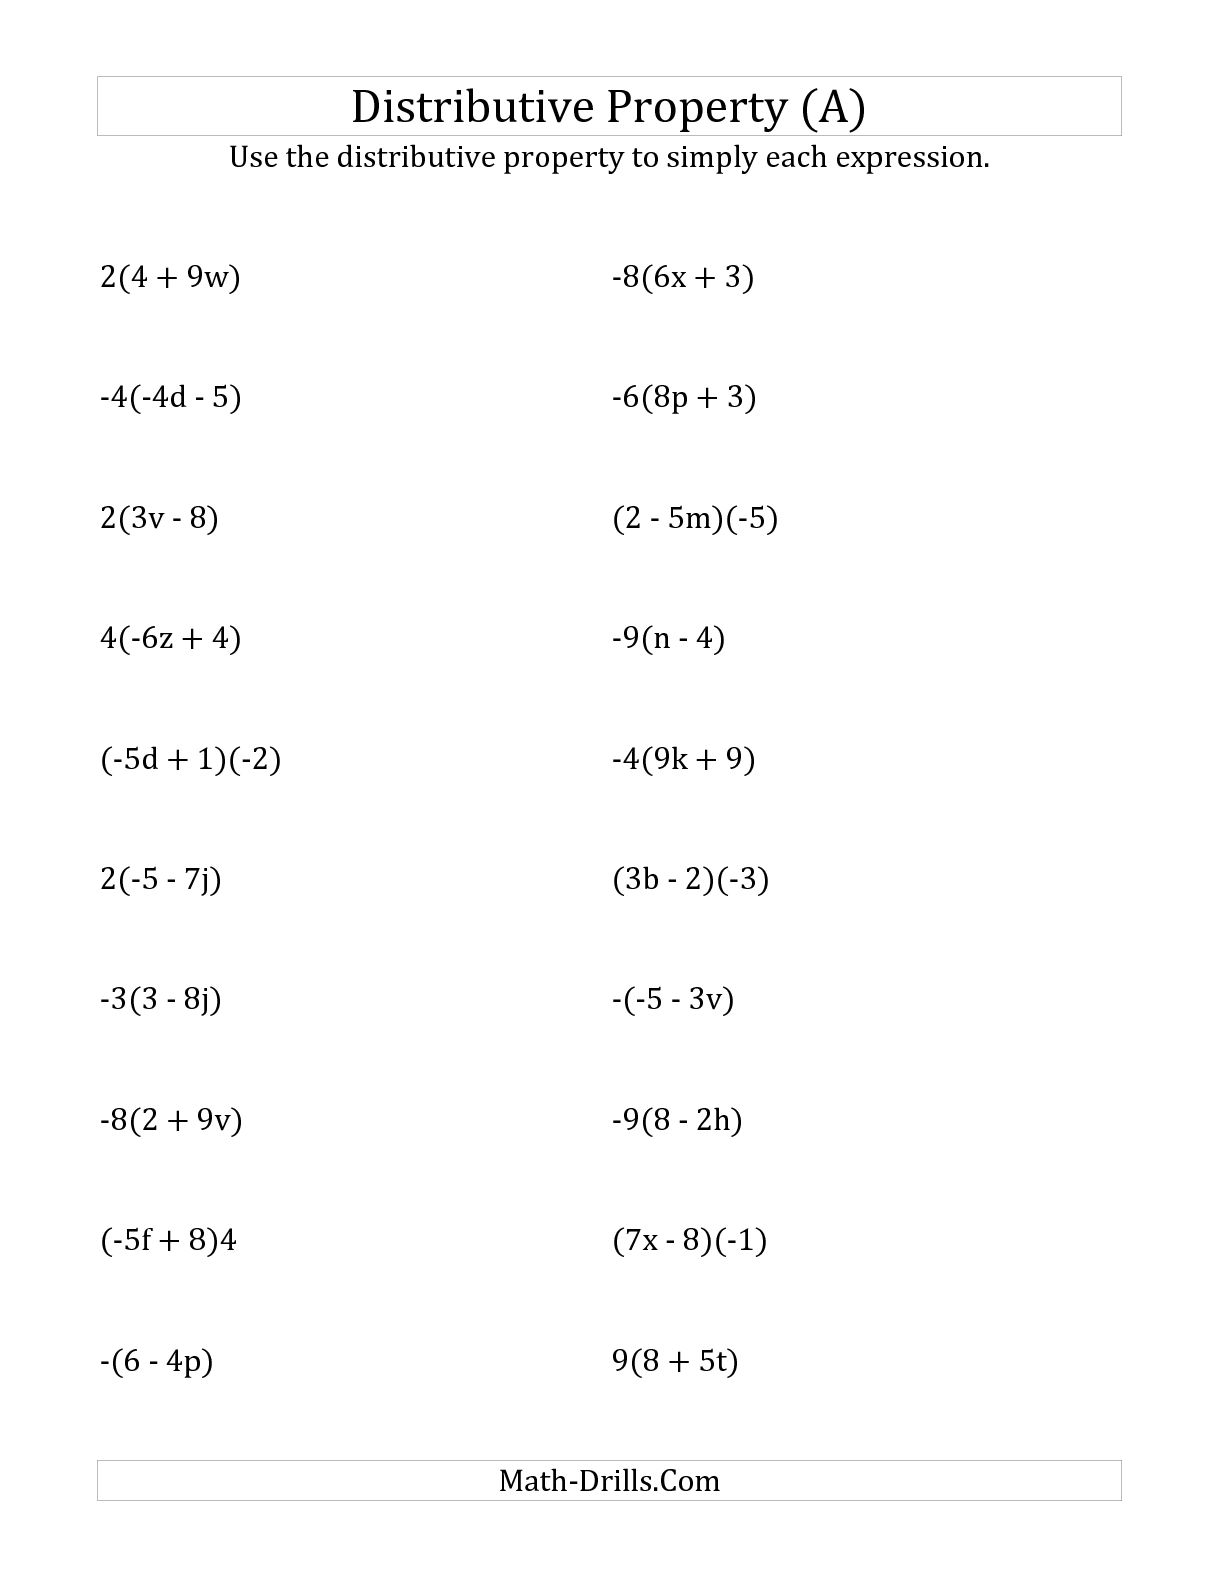 long-division-by-multiples-of-10-with-remainders-a-division-worksheet